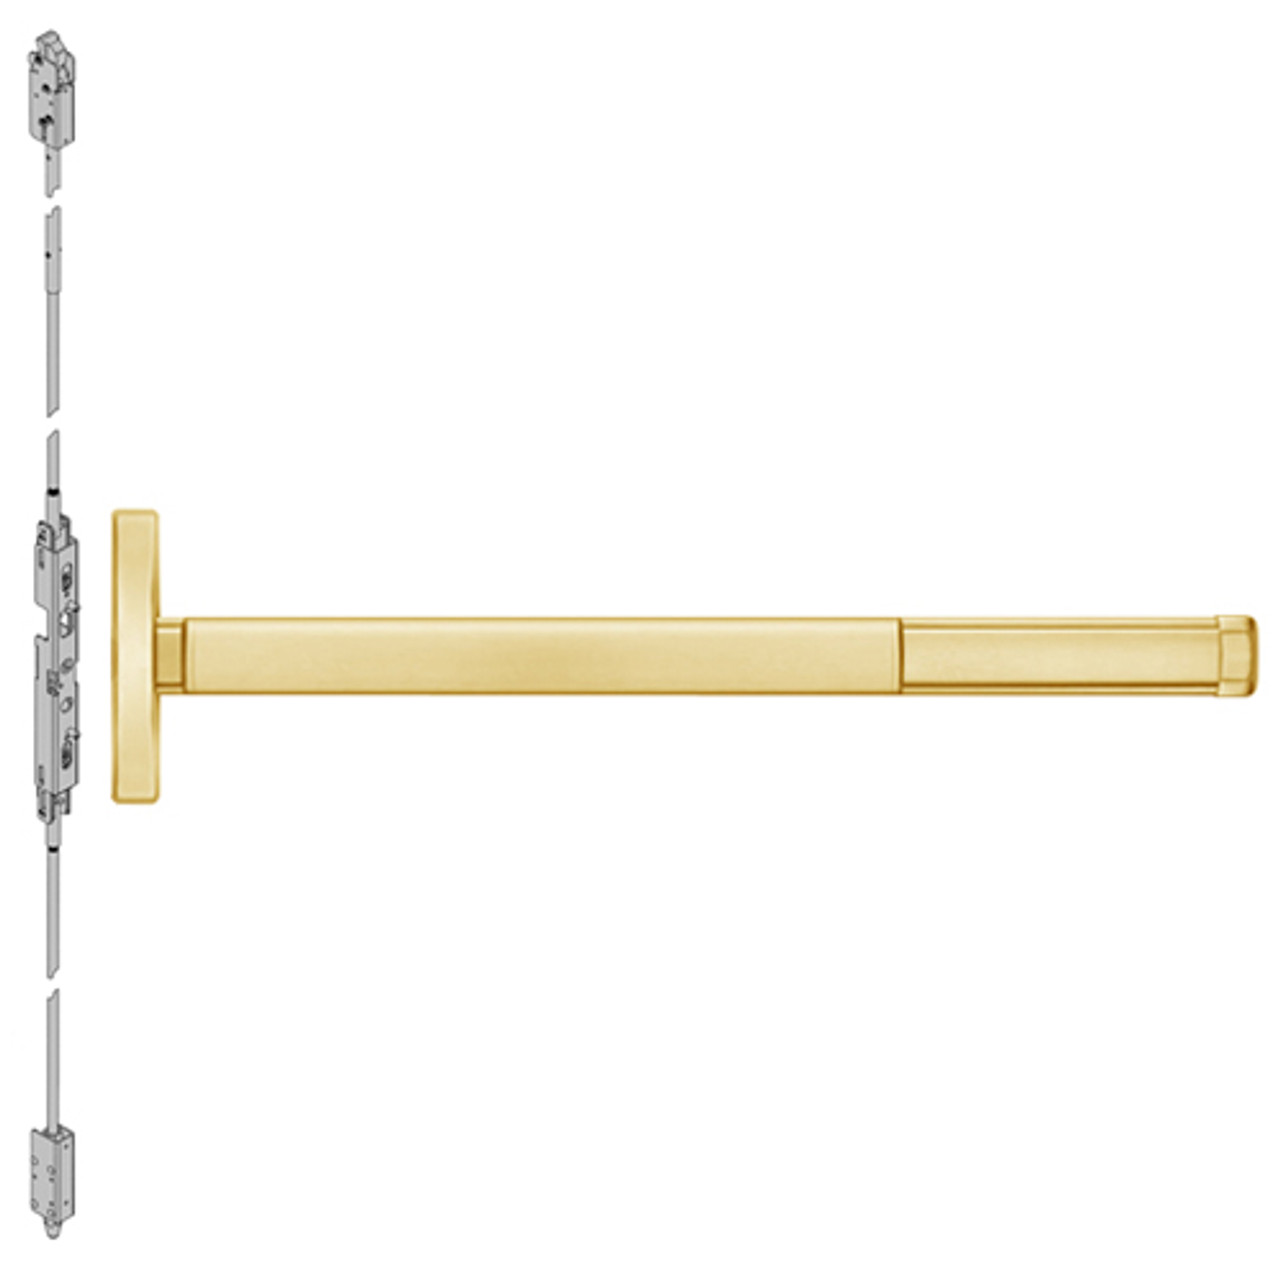 2603LBR-605-48 PHI 2600 Series Non Fire Rated Concealed Vertical Rod Exit Device Prepped for Key Retracts Latchbolt with Less Bottom Rod in Bright Brass Finish